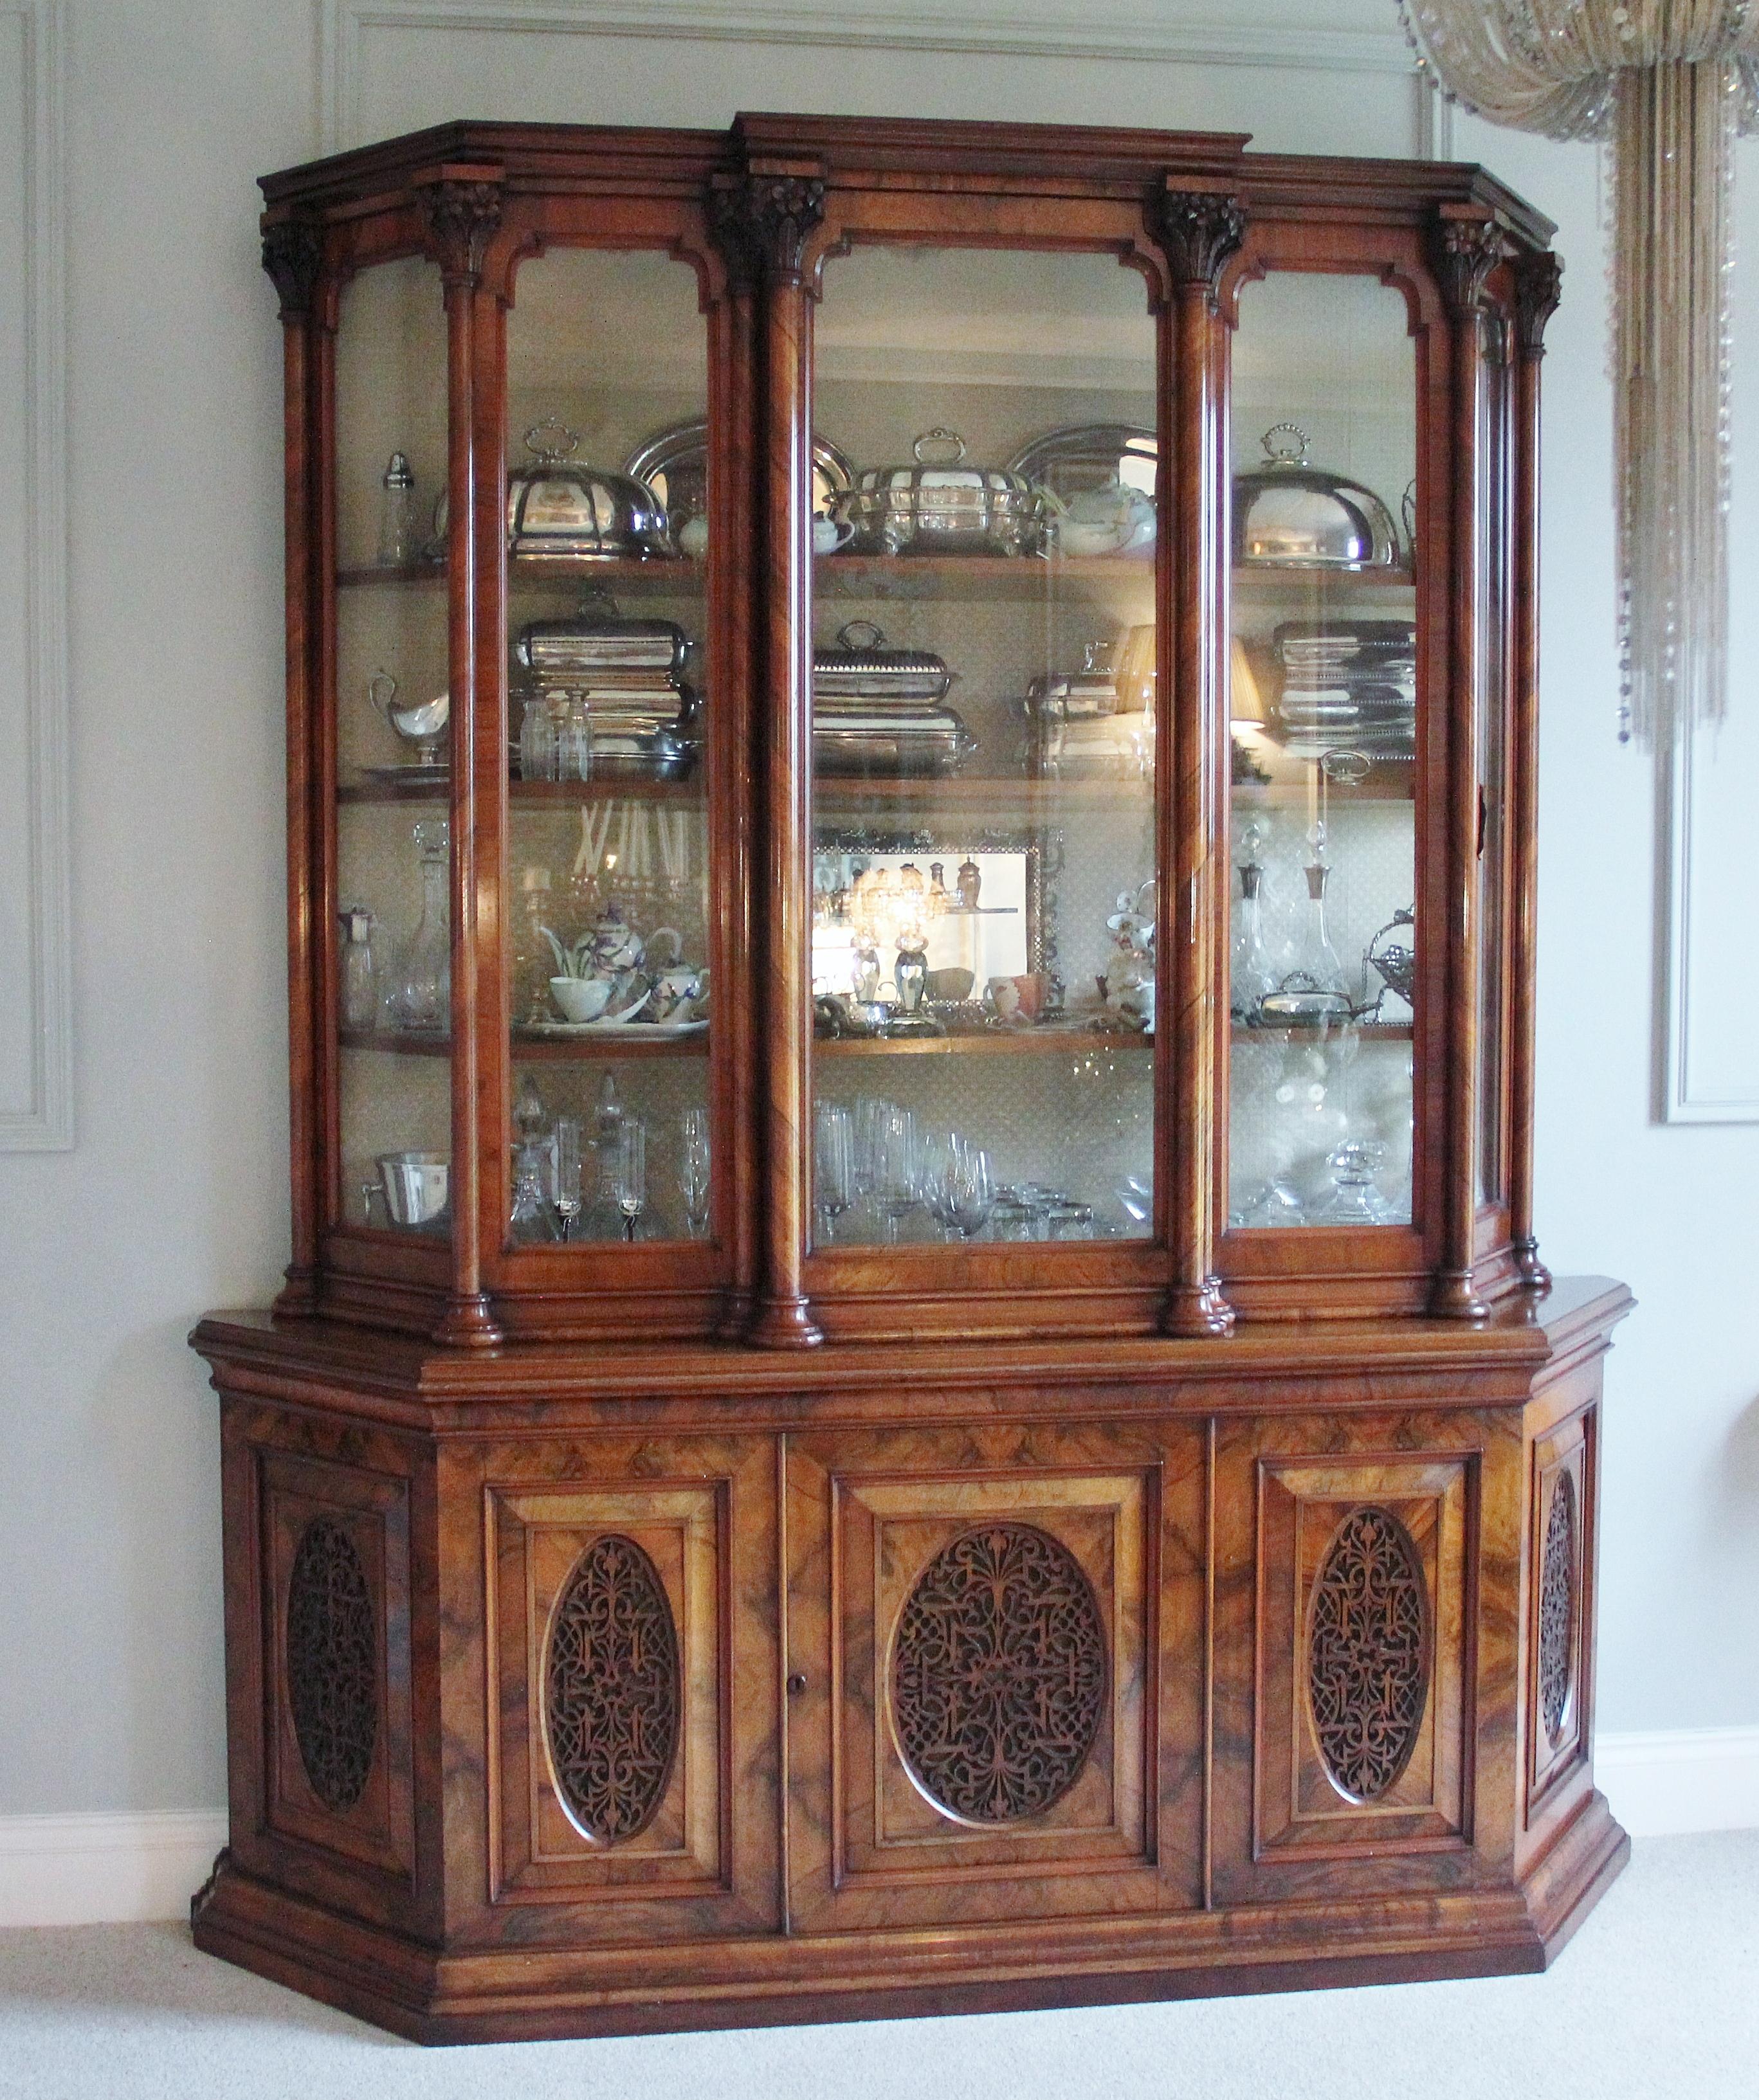 Early Victorian Exhibition Quality Antique Victorian Burr Walnut Carved Display Cabinet